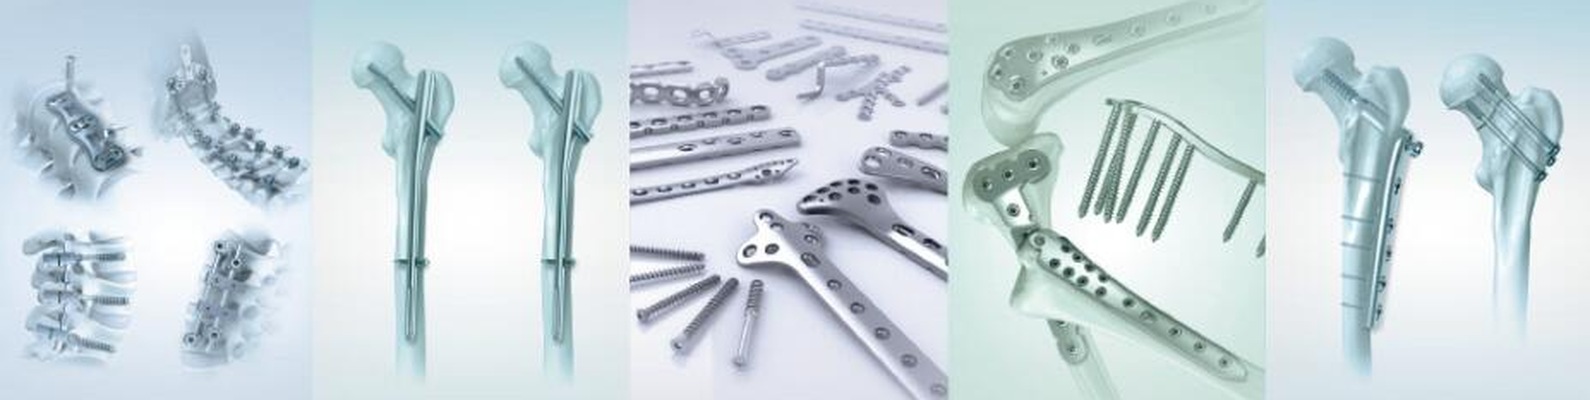 Small_Bone_And_Joint_Orthopedic_Devices_Market